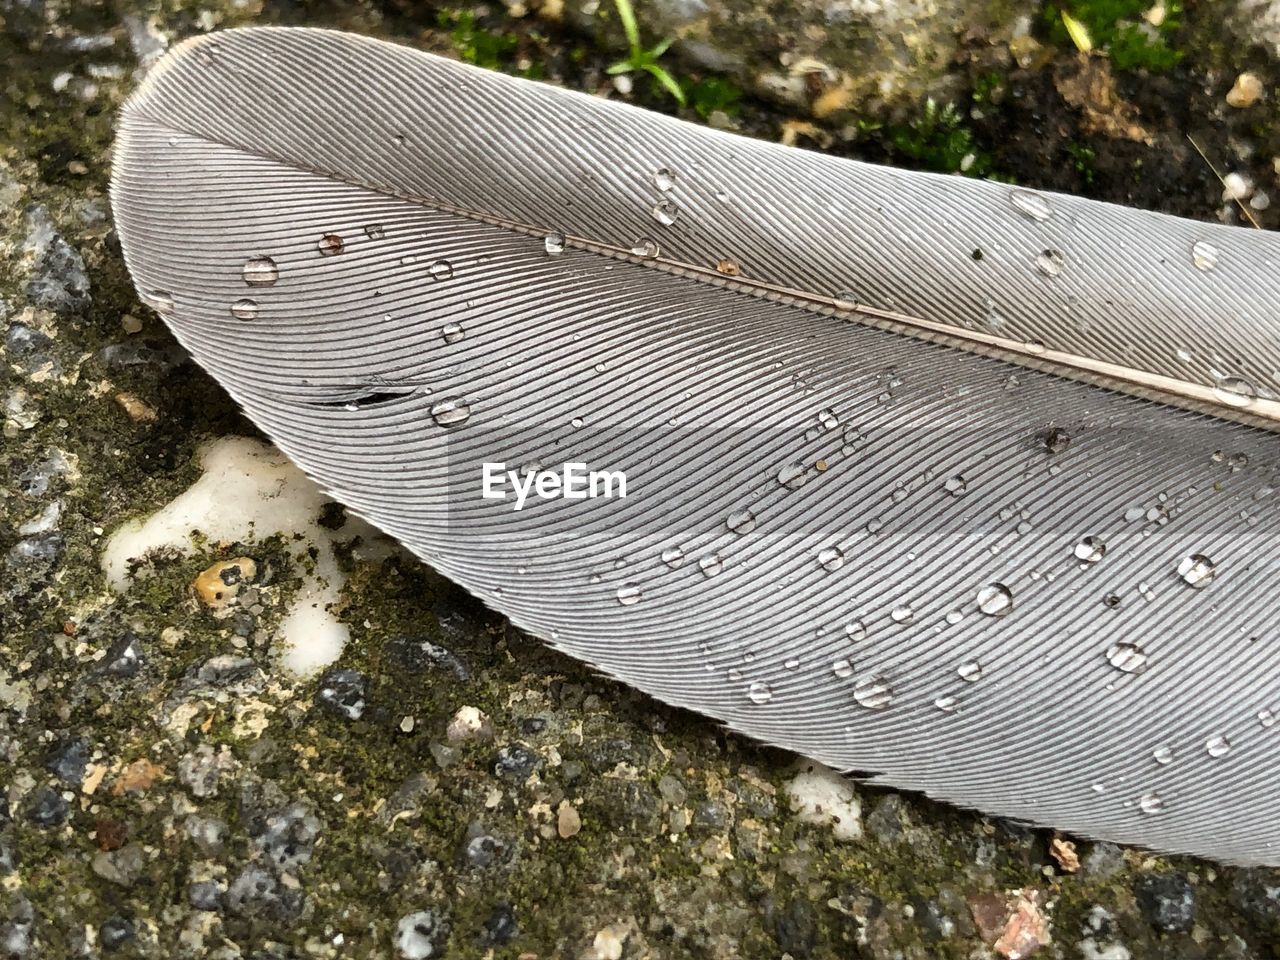 HIGH ANGLE VIEW OF FEATHER ON METAL